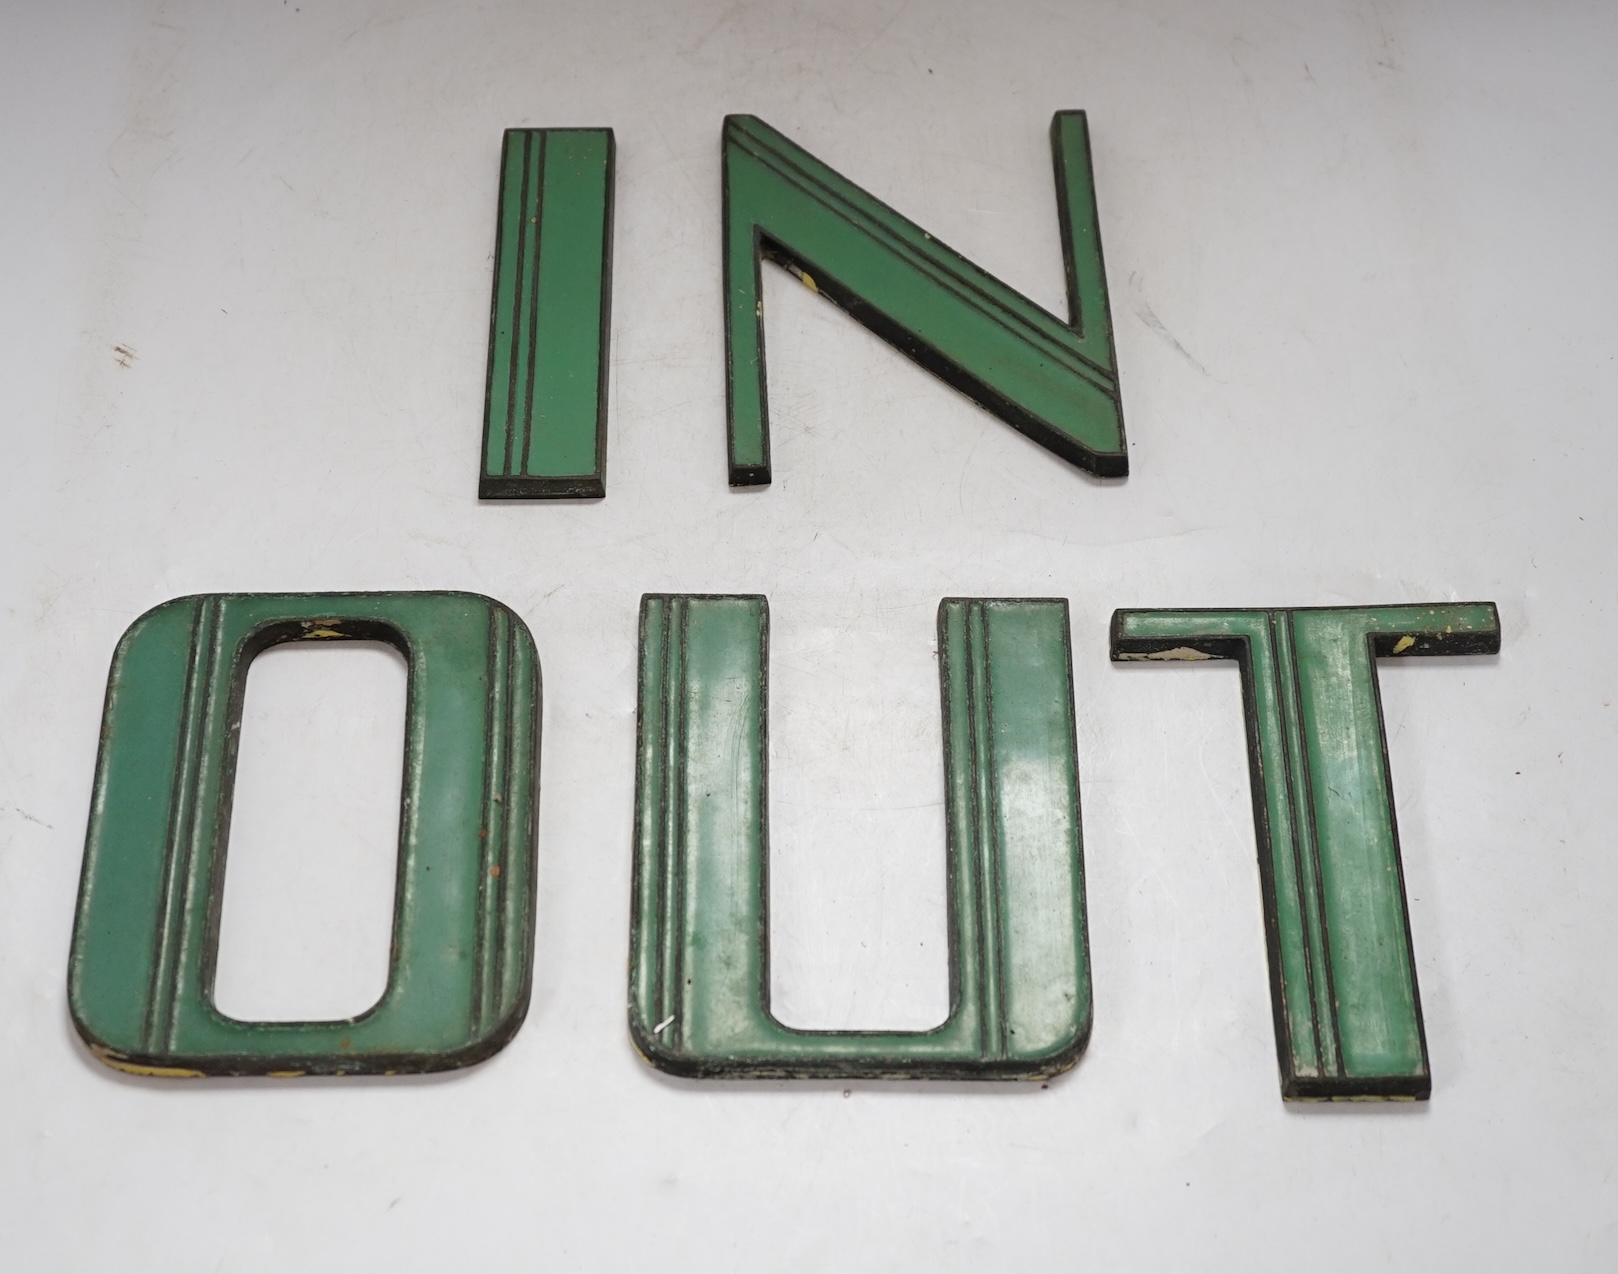 Art Deco green enamelled cast metal letters to spell ‘IN’ and ‘OUT’, 15cm tall. Condition - fair to good